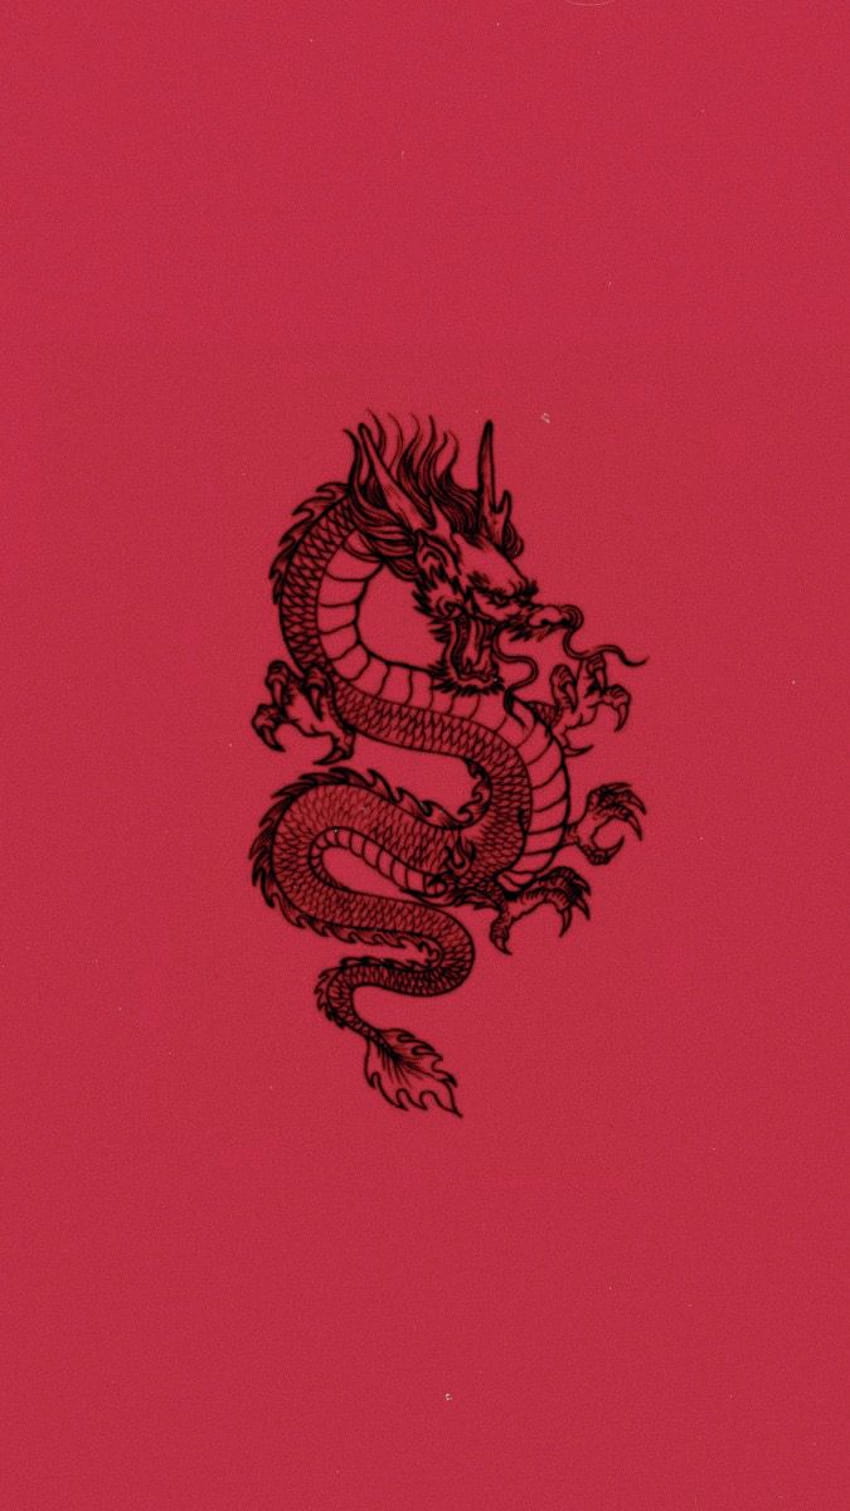 A red dragon is shown on the cover of an album - Dragon